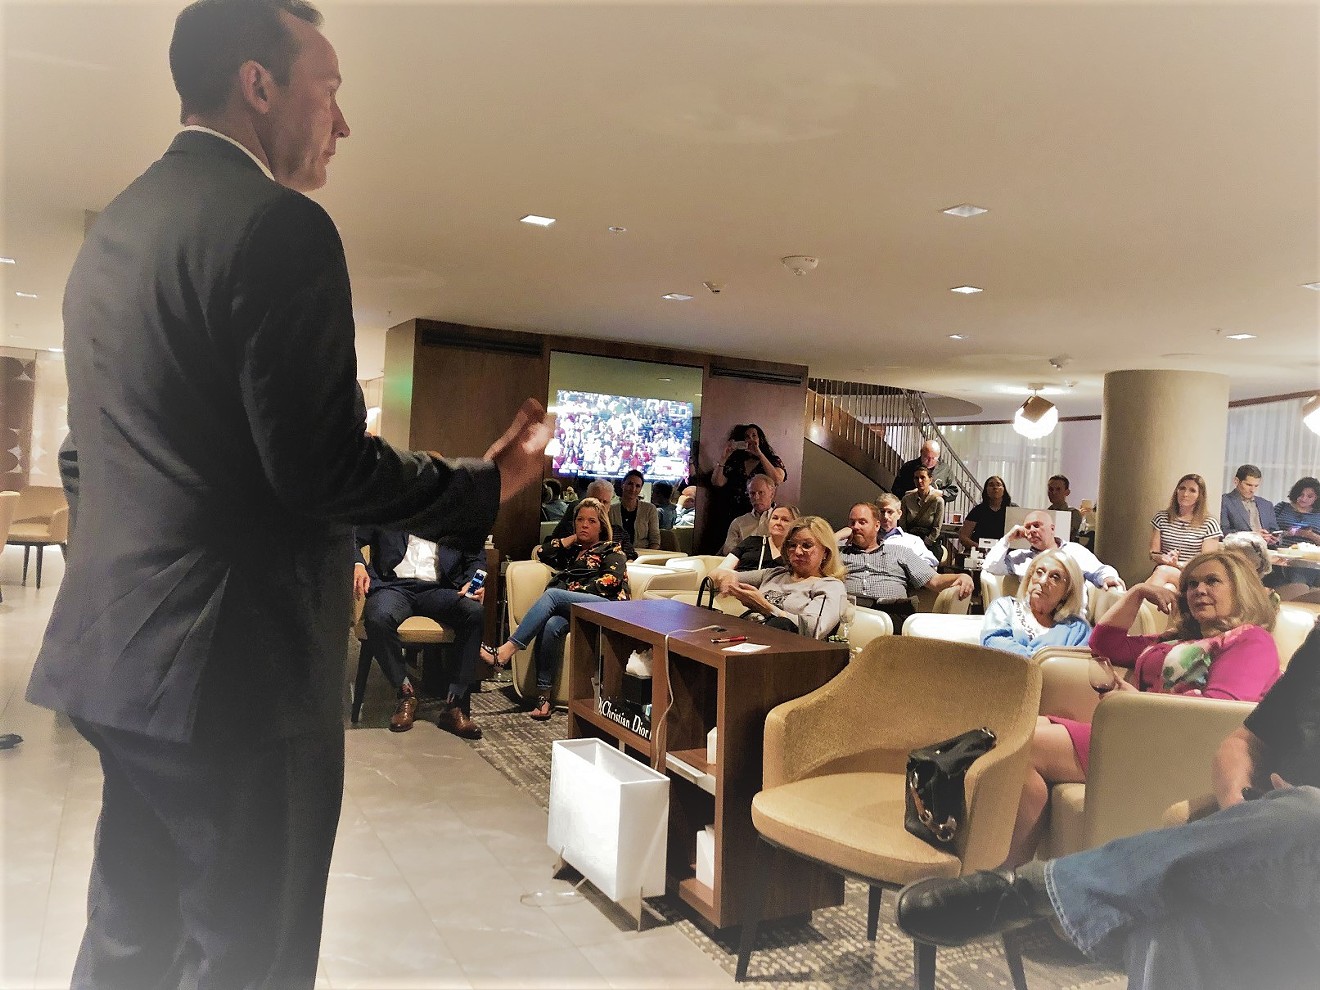 Dallas City Council District 14 incumbent Philip Kingston spoke to a well-upholstered peanut gallery in a debate with challenger David Blewett at the Hotel A/C downtown last week.